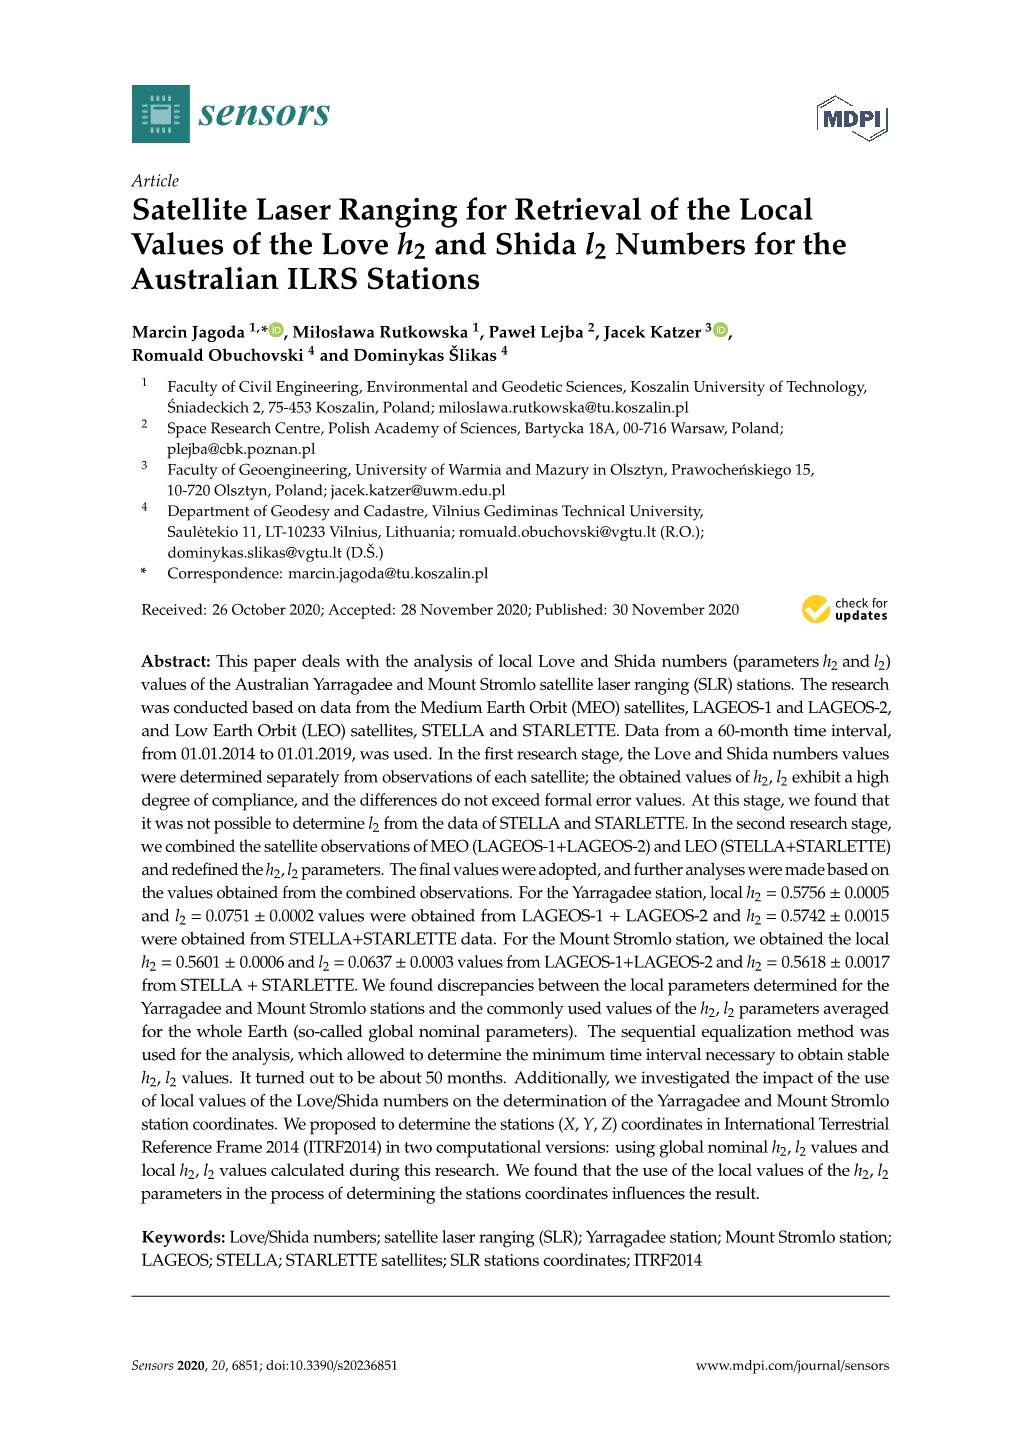 Satellite Laser Ranging for Retrieval of the Local Values of the Love H2 and Shida L2 Numbers for the Australian ILRS Stations